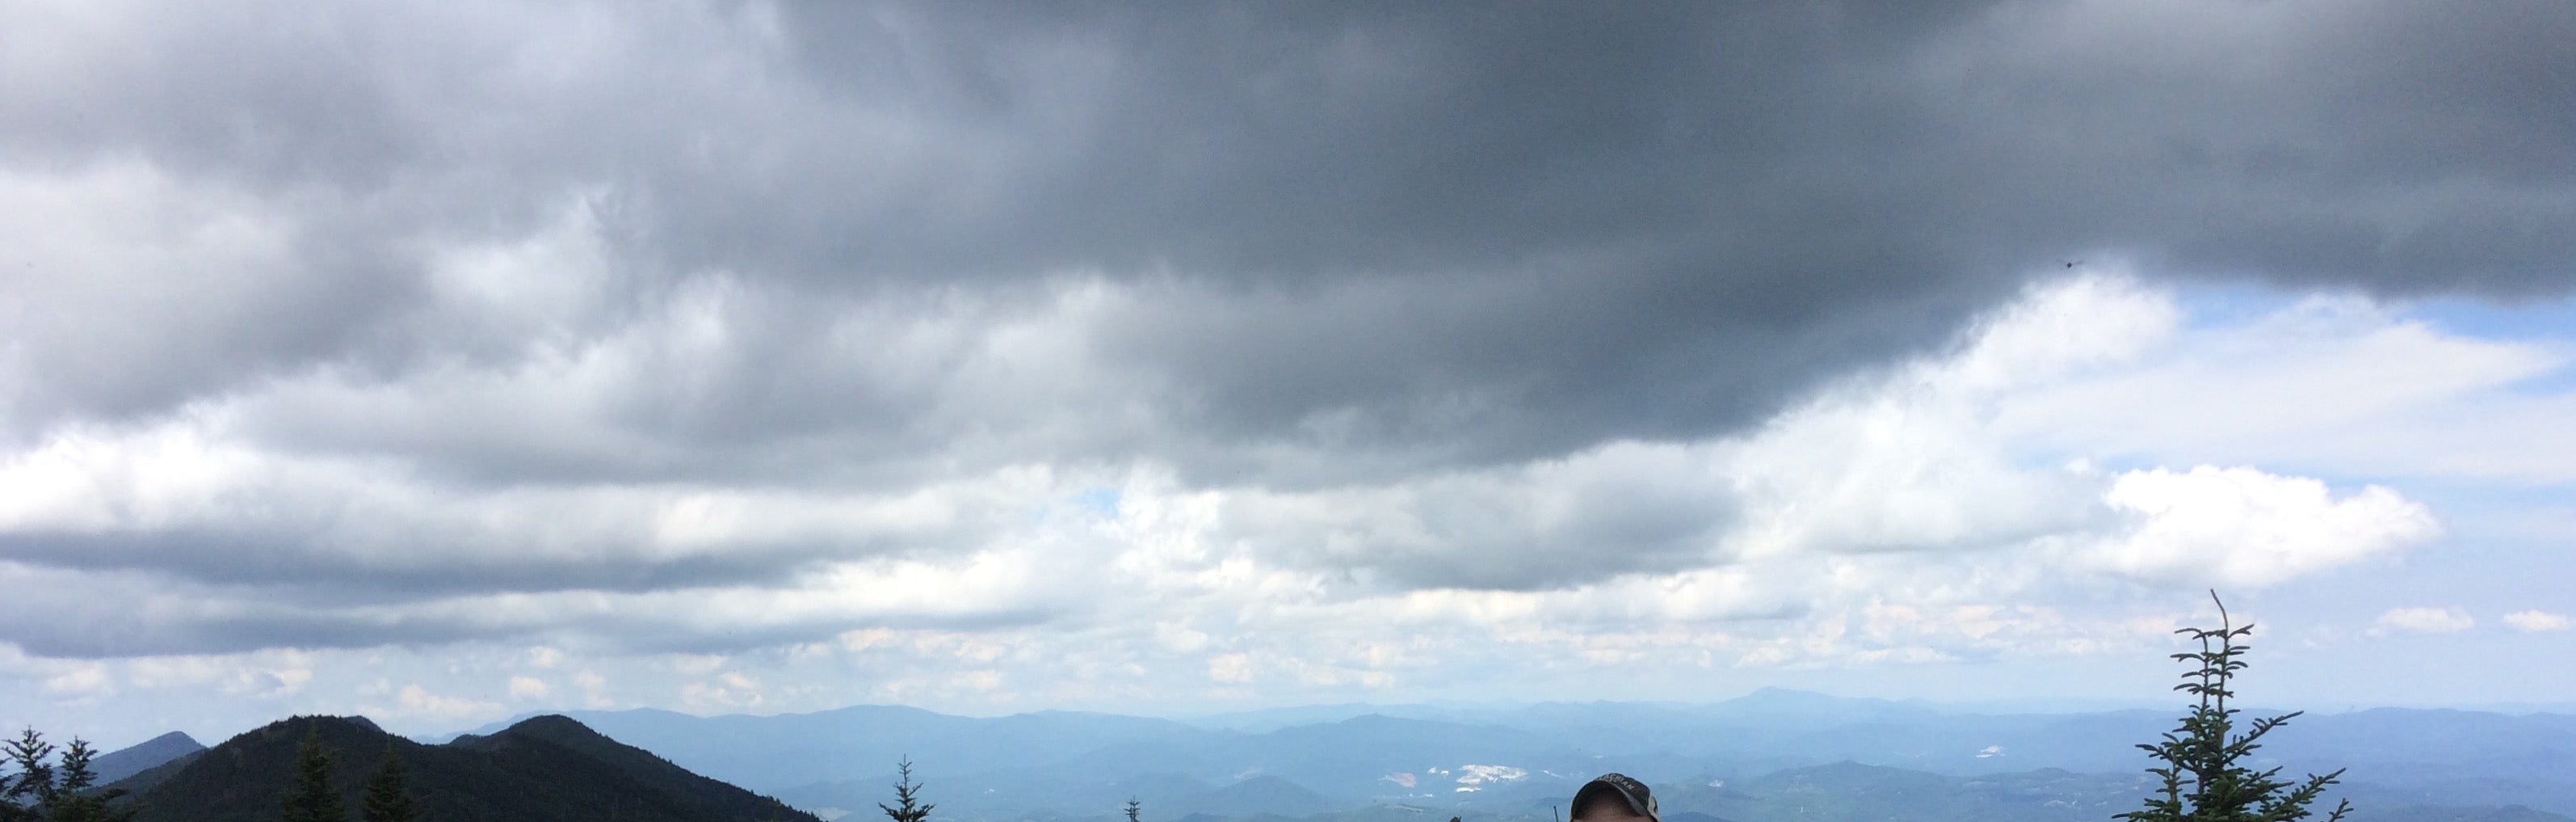 Camper submitted image from Mount Mitchell State Park - 2